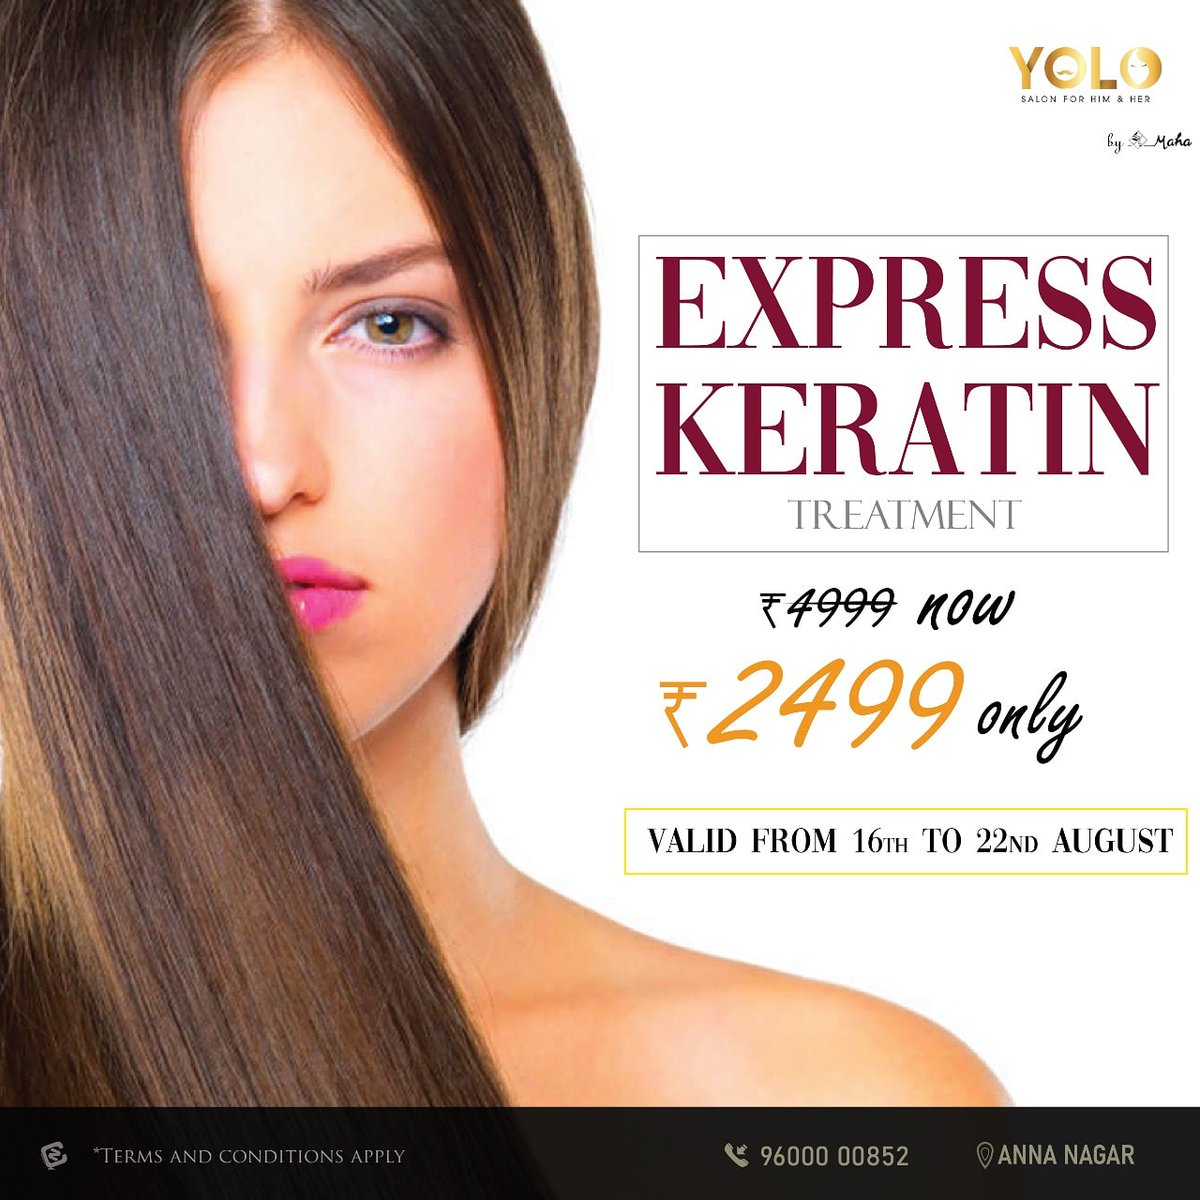 Our exciting weekly offer is back!  Express keratin treatment worth Rs. 4999 is now at Rs. 2499 .
.
.
.
Grab it before it expires!  
.
.
#youonlyliveonce #YOLO #salonoffer #annanagar #skintreatments #keratin #keratinoffer #keratinsmoothening #keratintreatment #keratintreatments